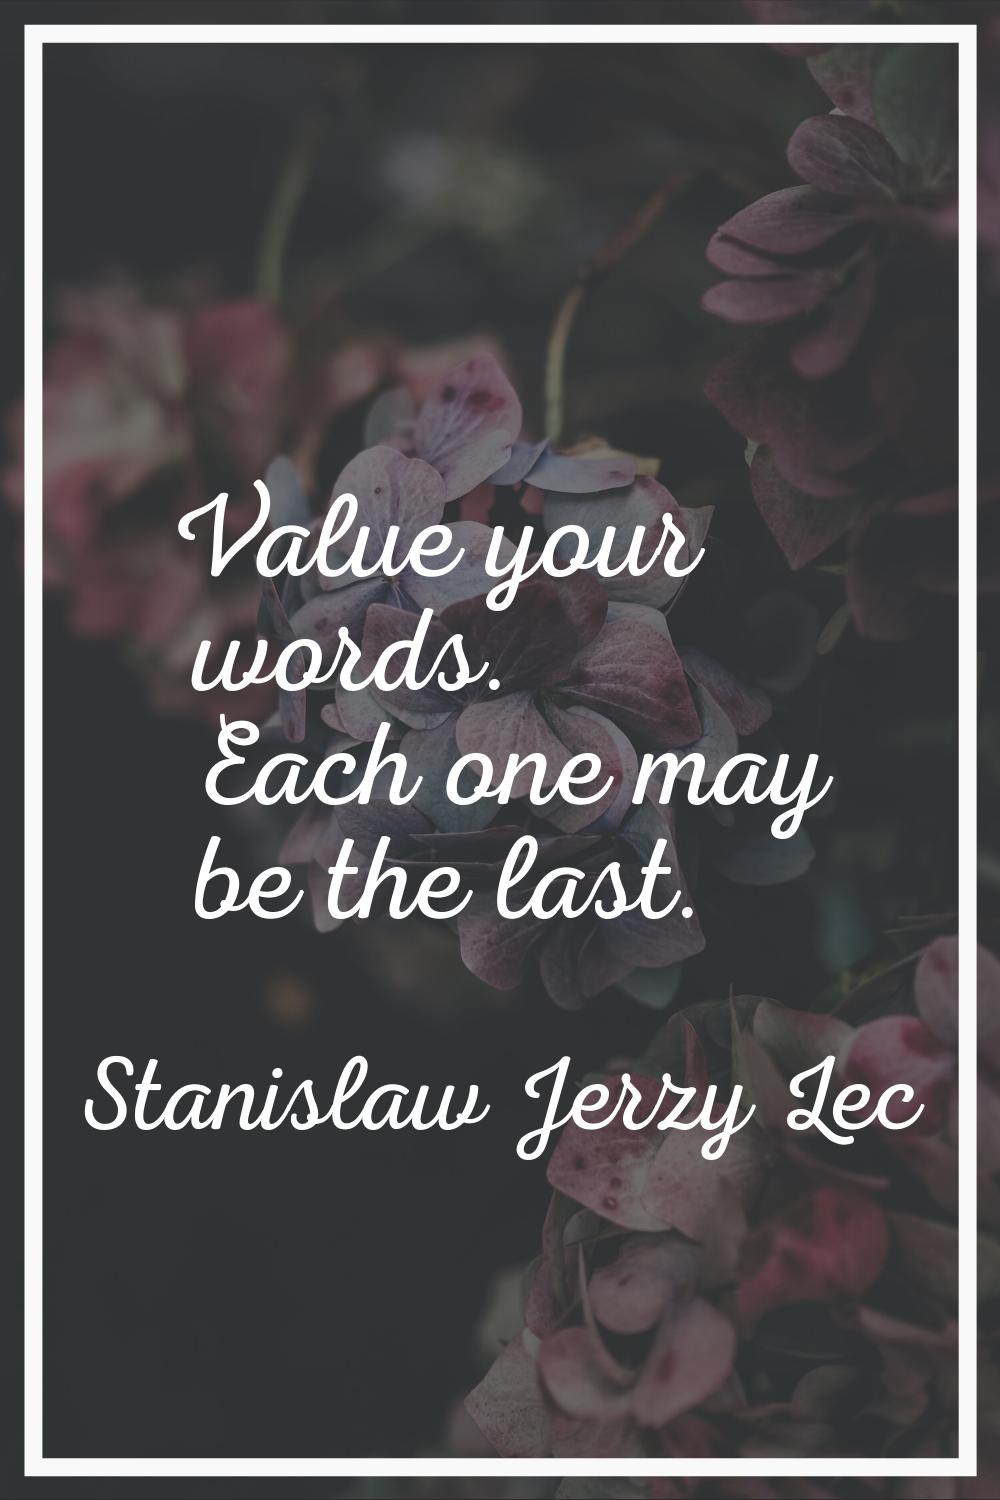 Value your words. Each one may be the last.